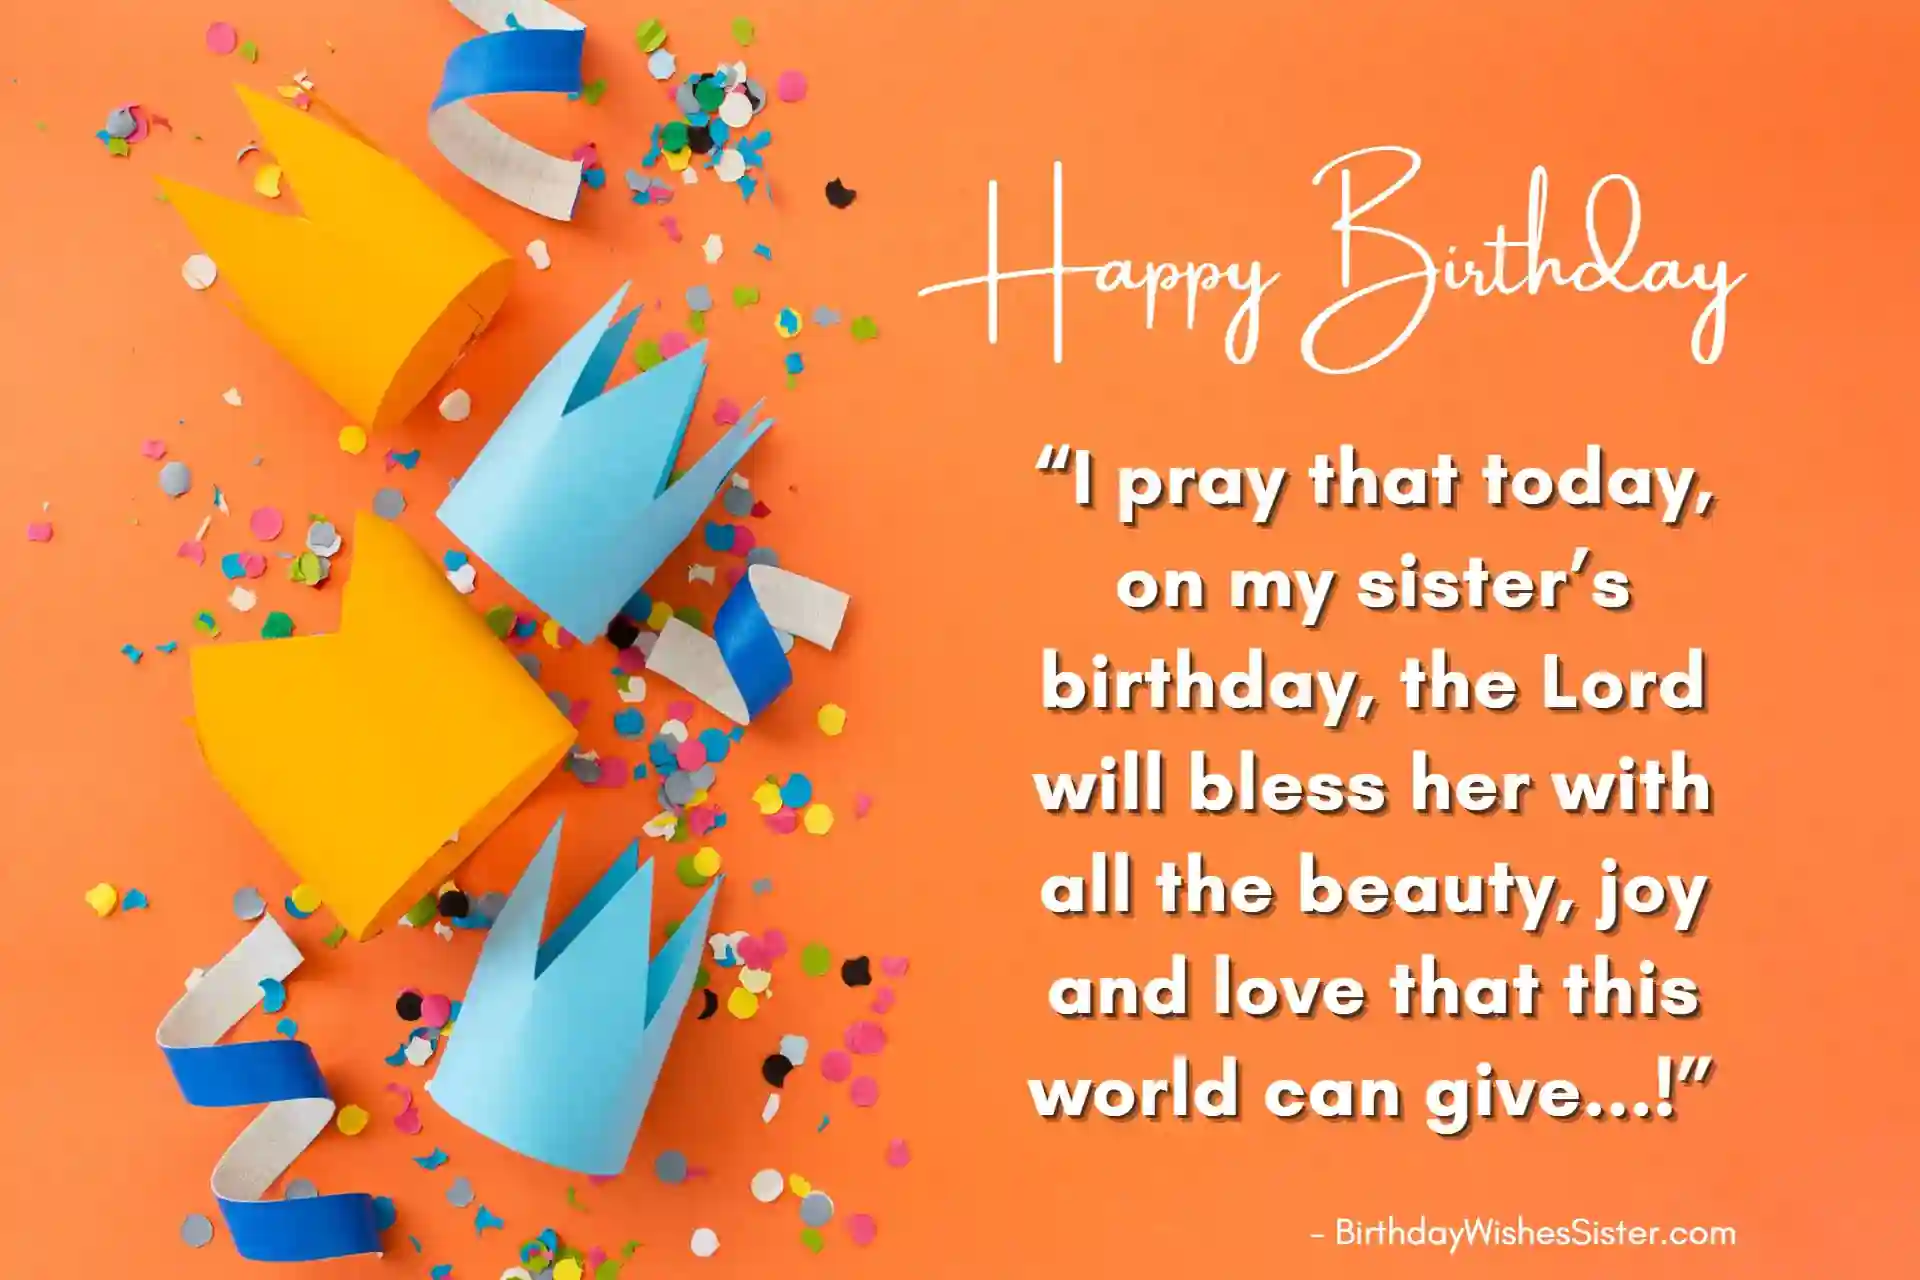 Blessing Sister Birthday Wishes, Birthday Wishes For Sister